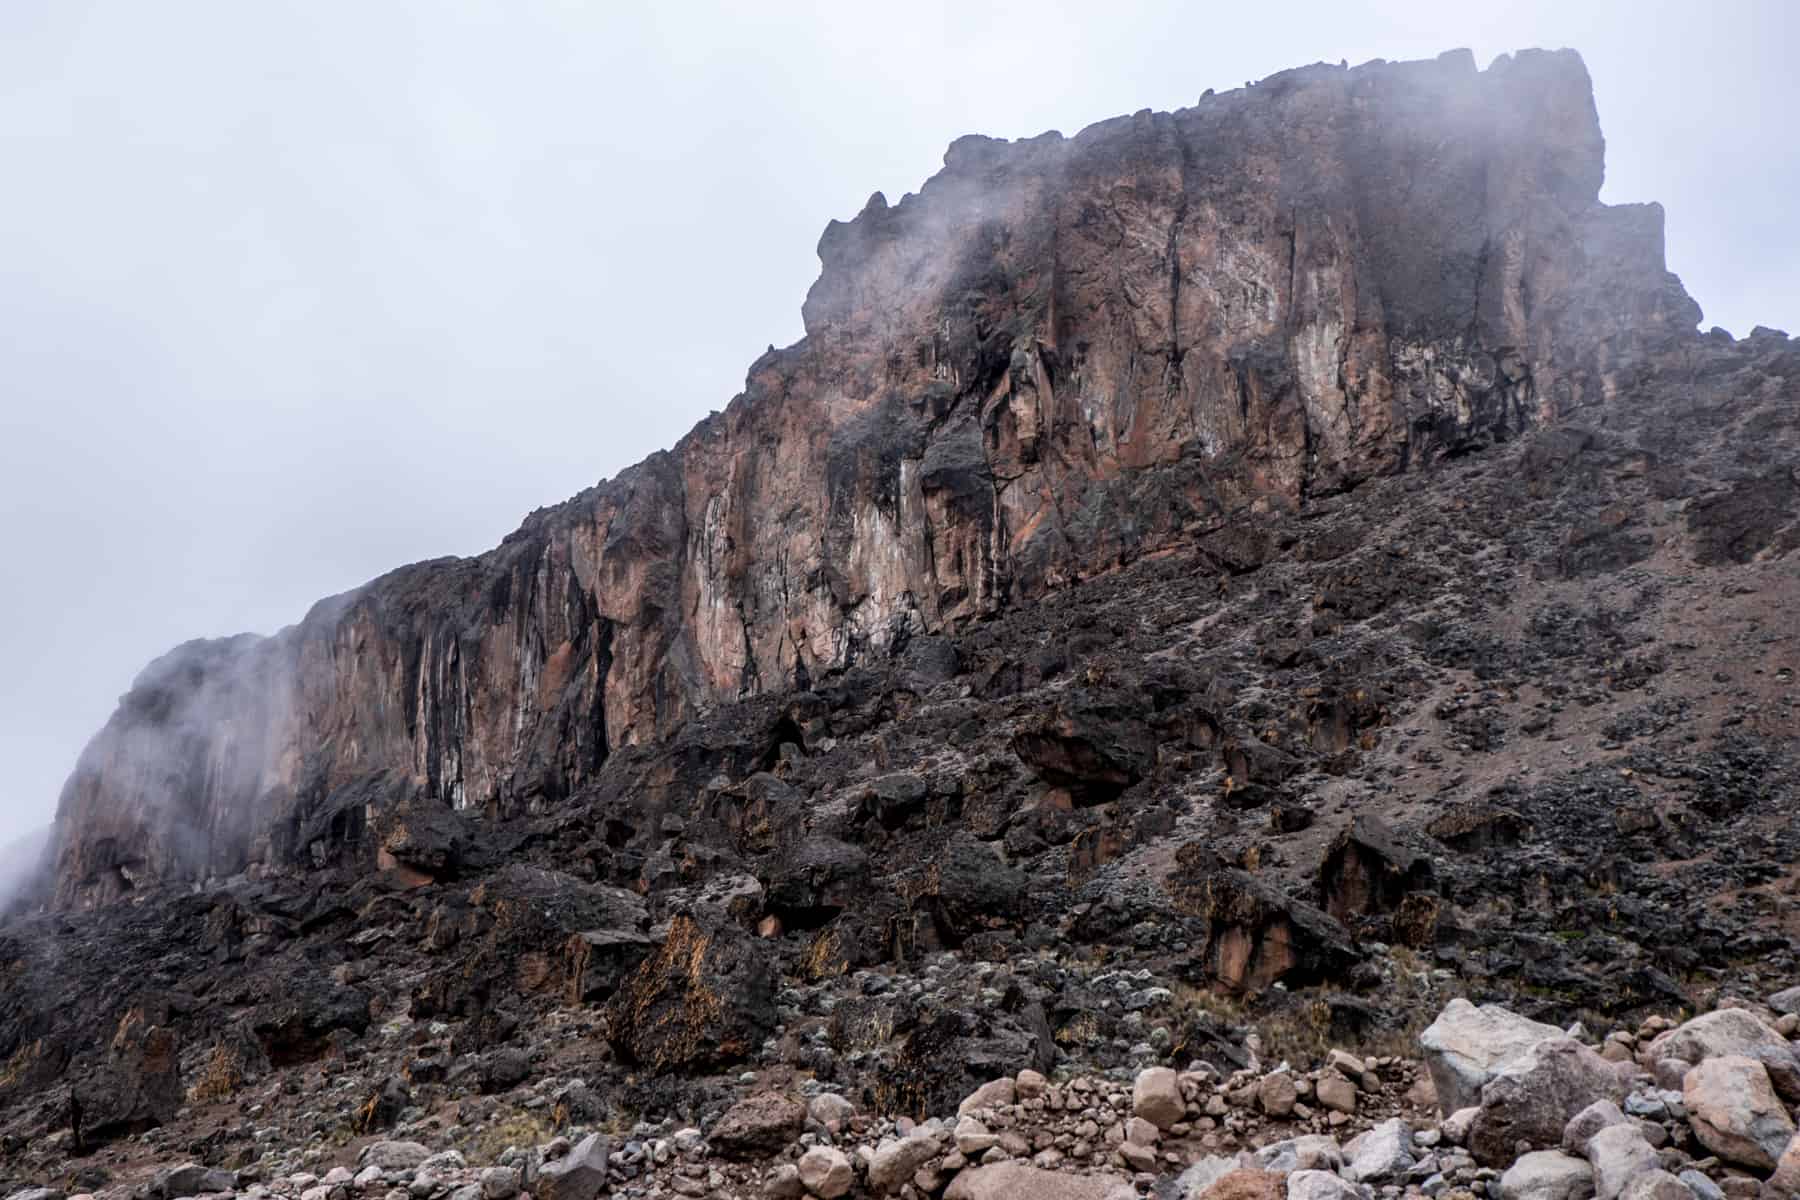 The burnt orange and black rectangular rock known as the Lava Tower, seen on the Kilimanjaro climb.